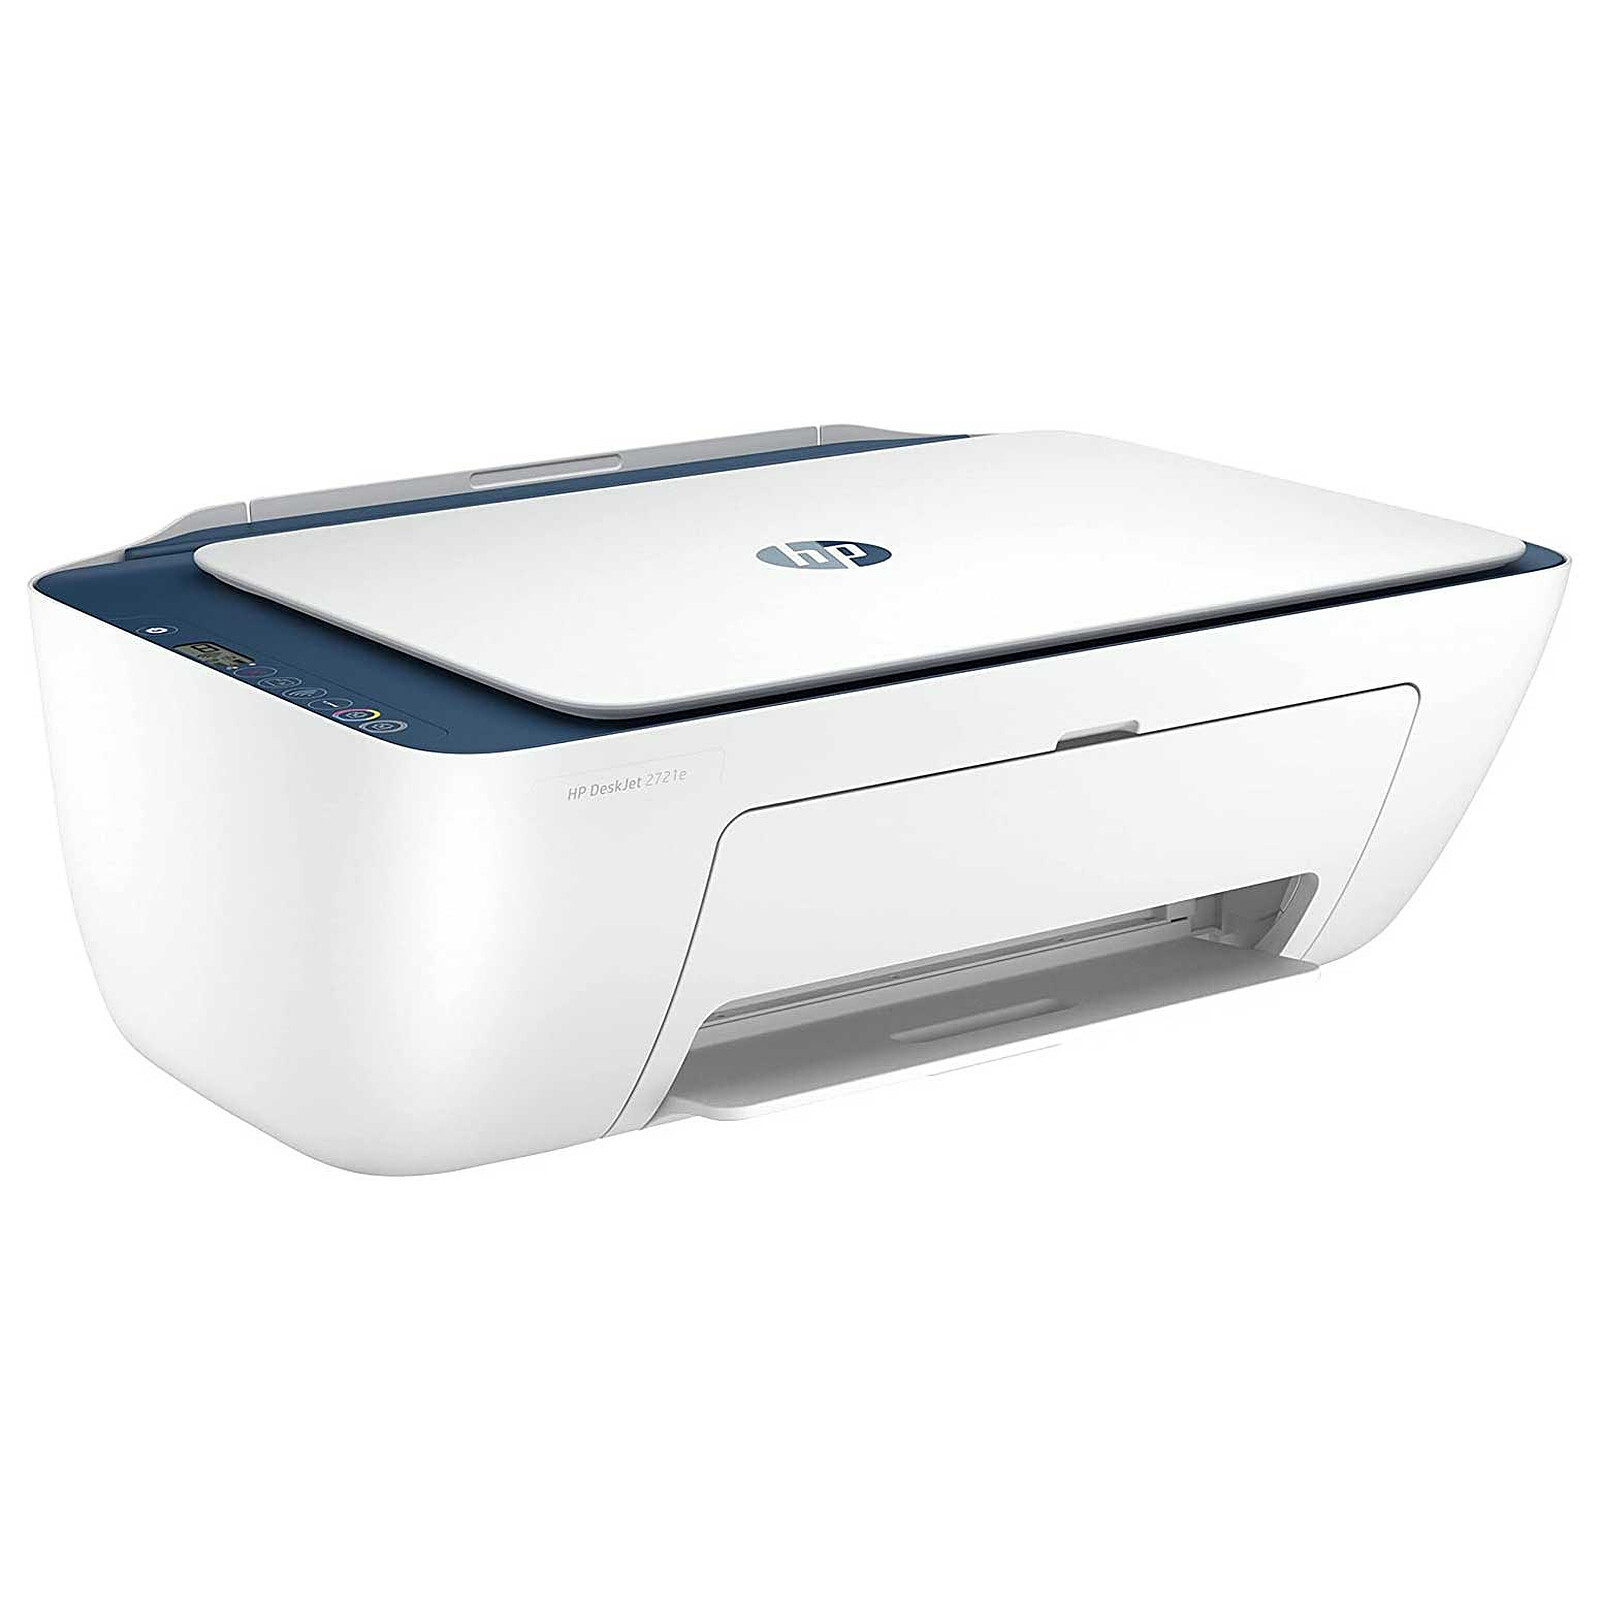 HP DeskJet 2721e All in One - All-in-one printer - LDLC 3-year warranty